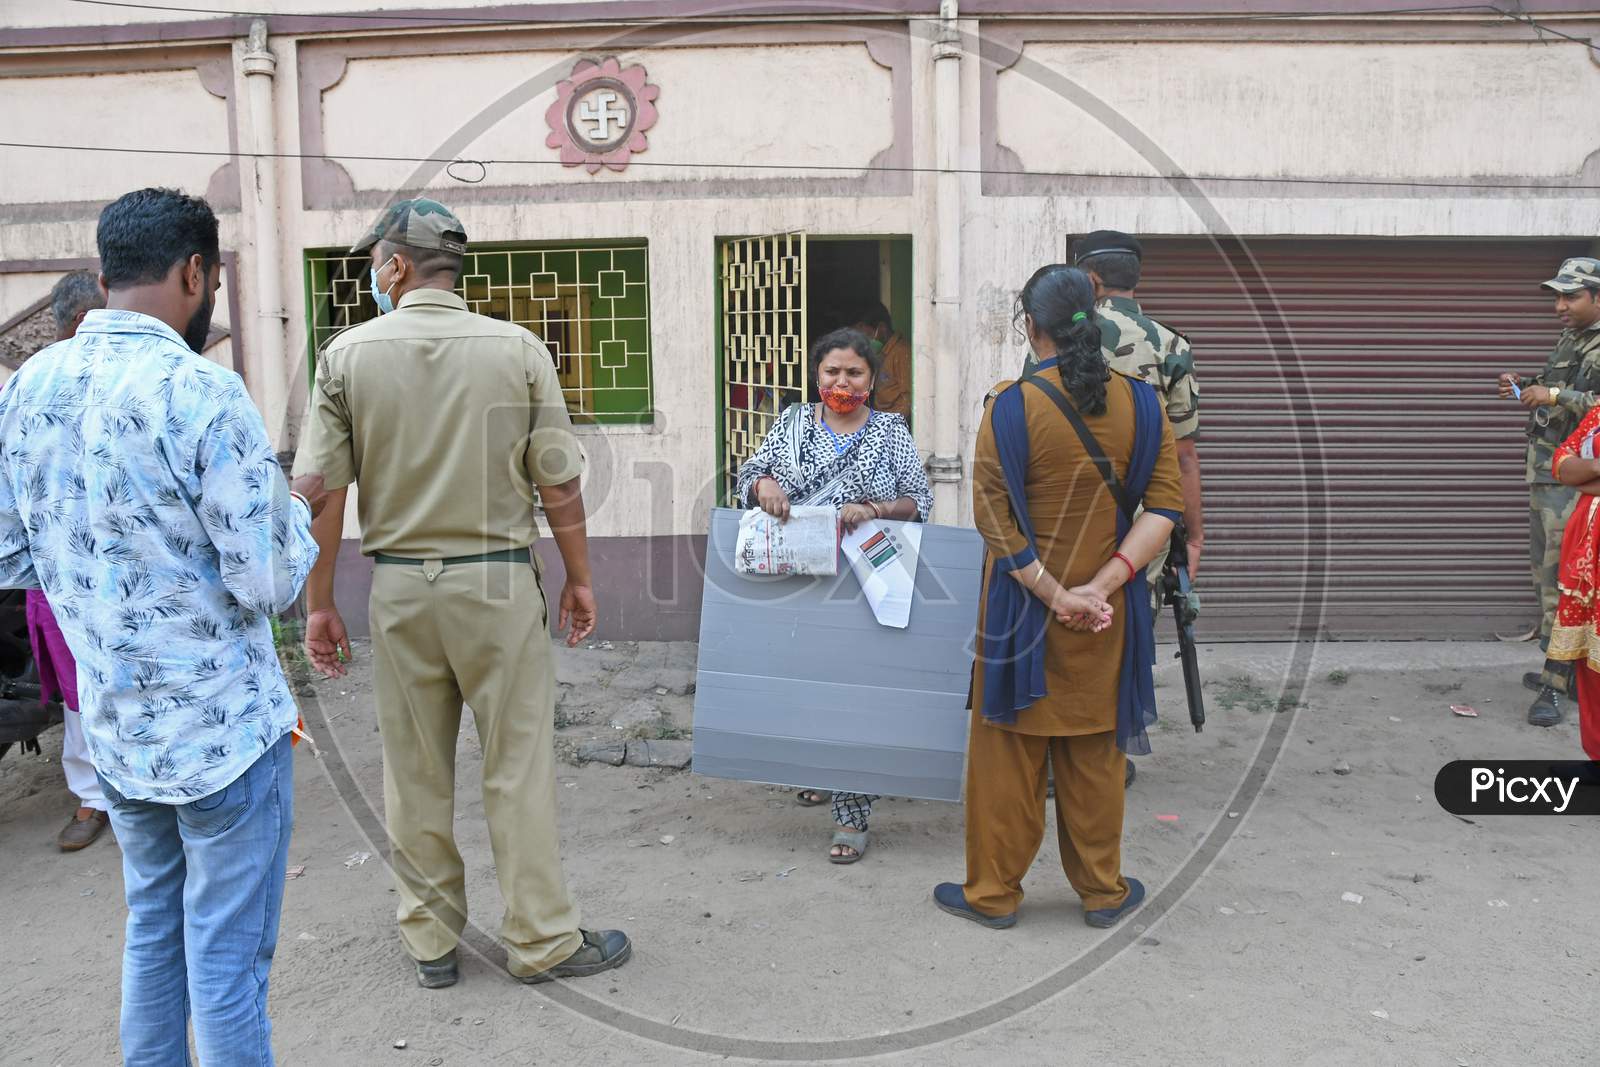 Election Commission officials escorted by the Central Forces were seen visiting door to door to help elderly citizens exercising their voting rights across the 8 Assembly Constituencies in Purba Bardhaman District